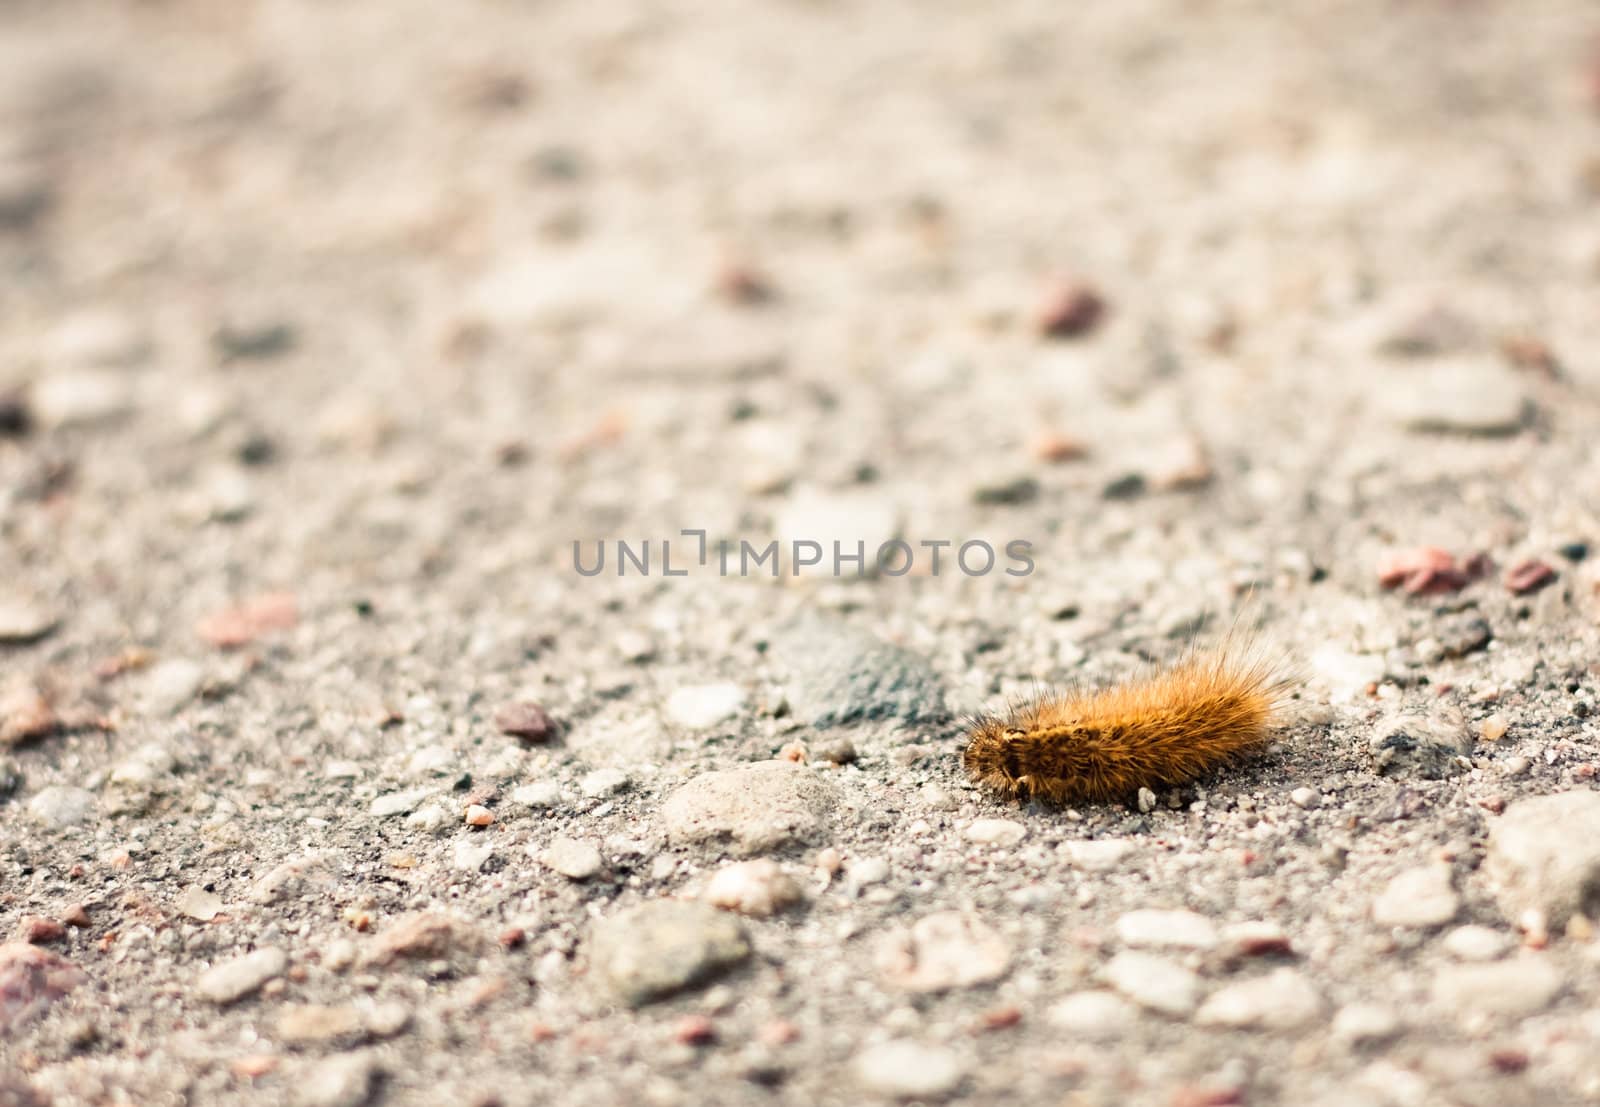 Caterpillar in natural conditions of a habitat